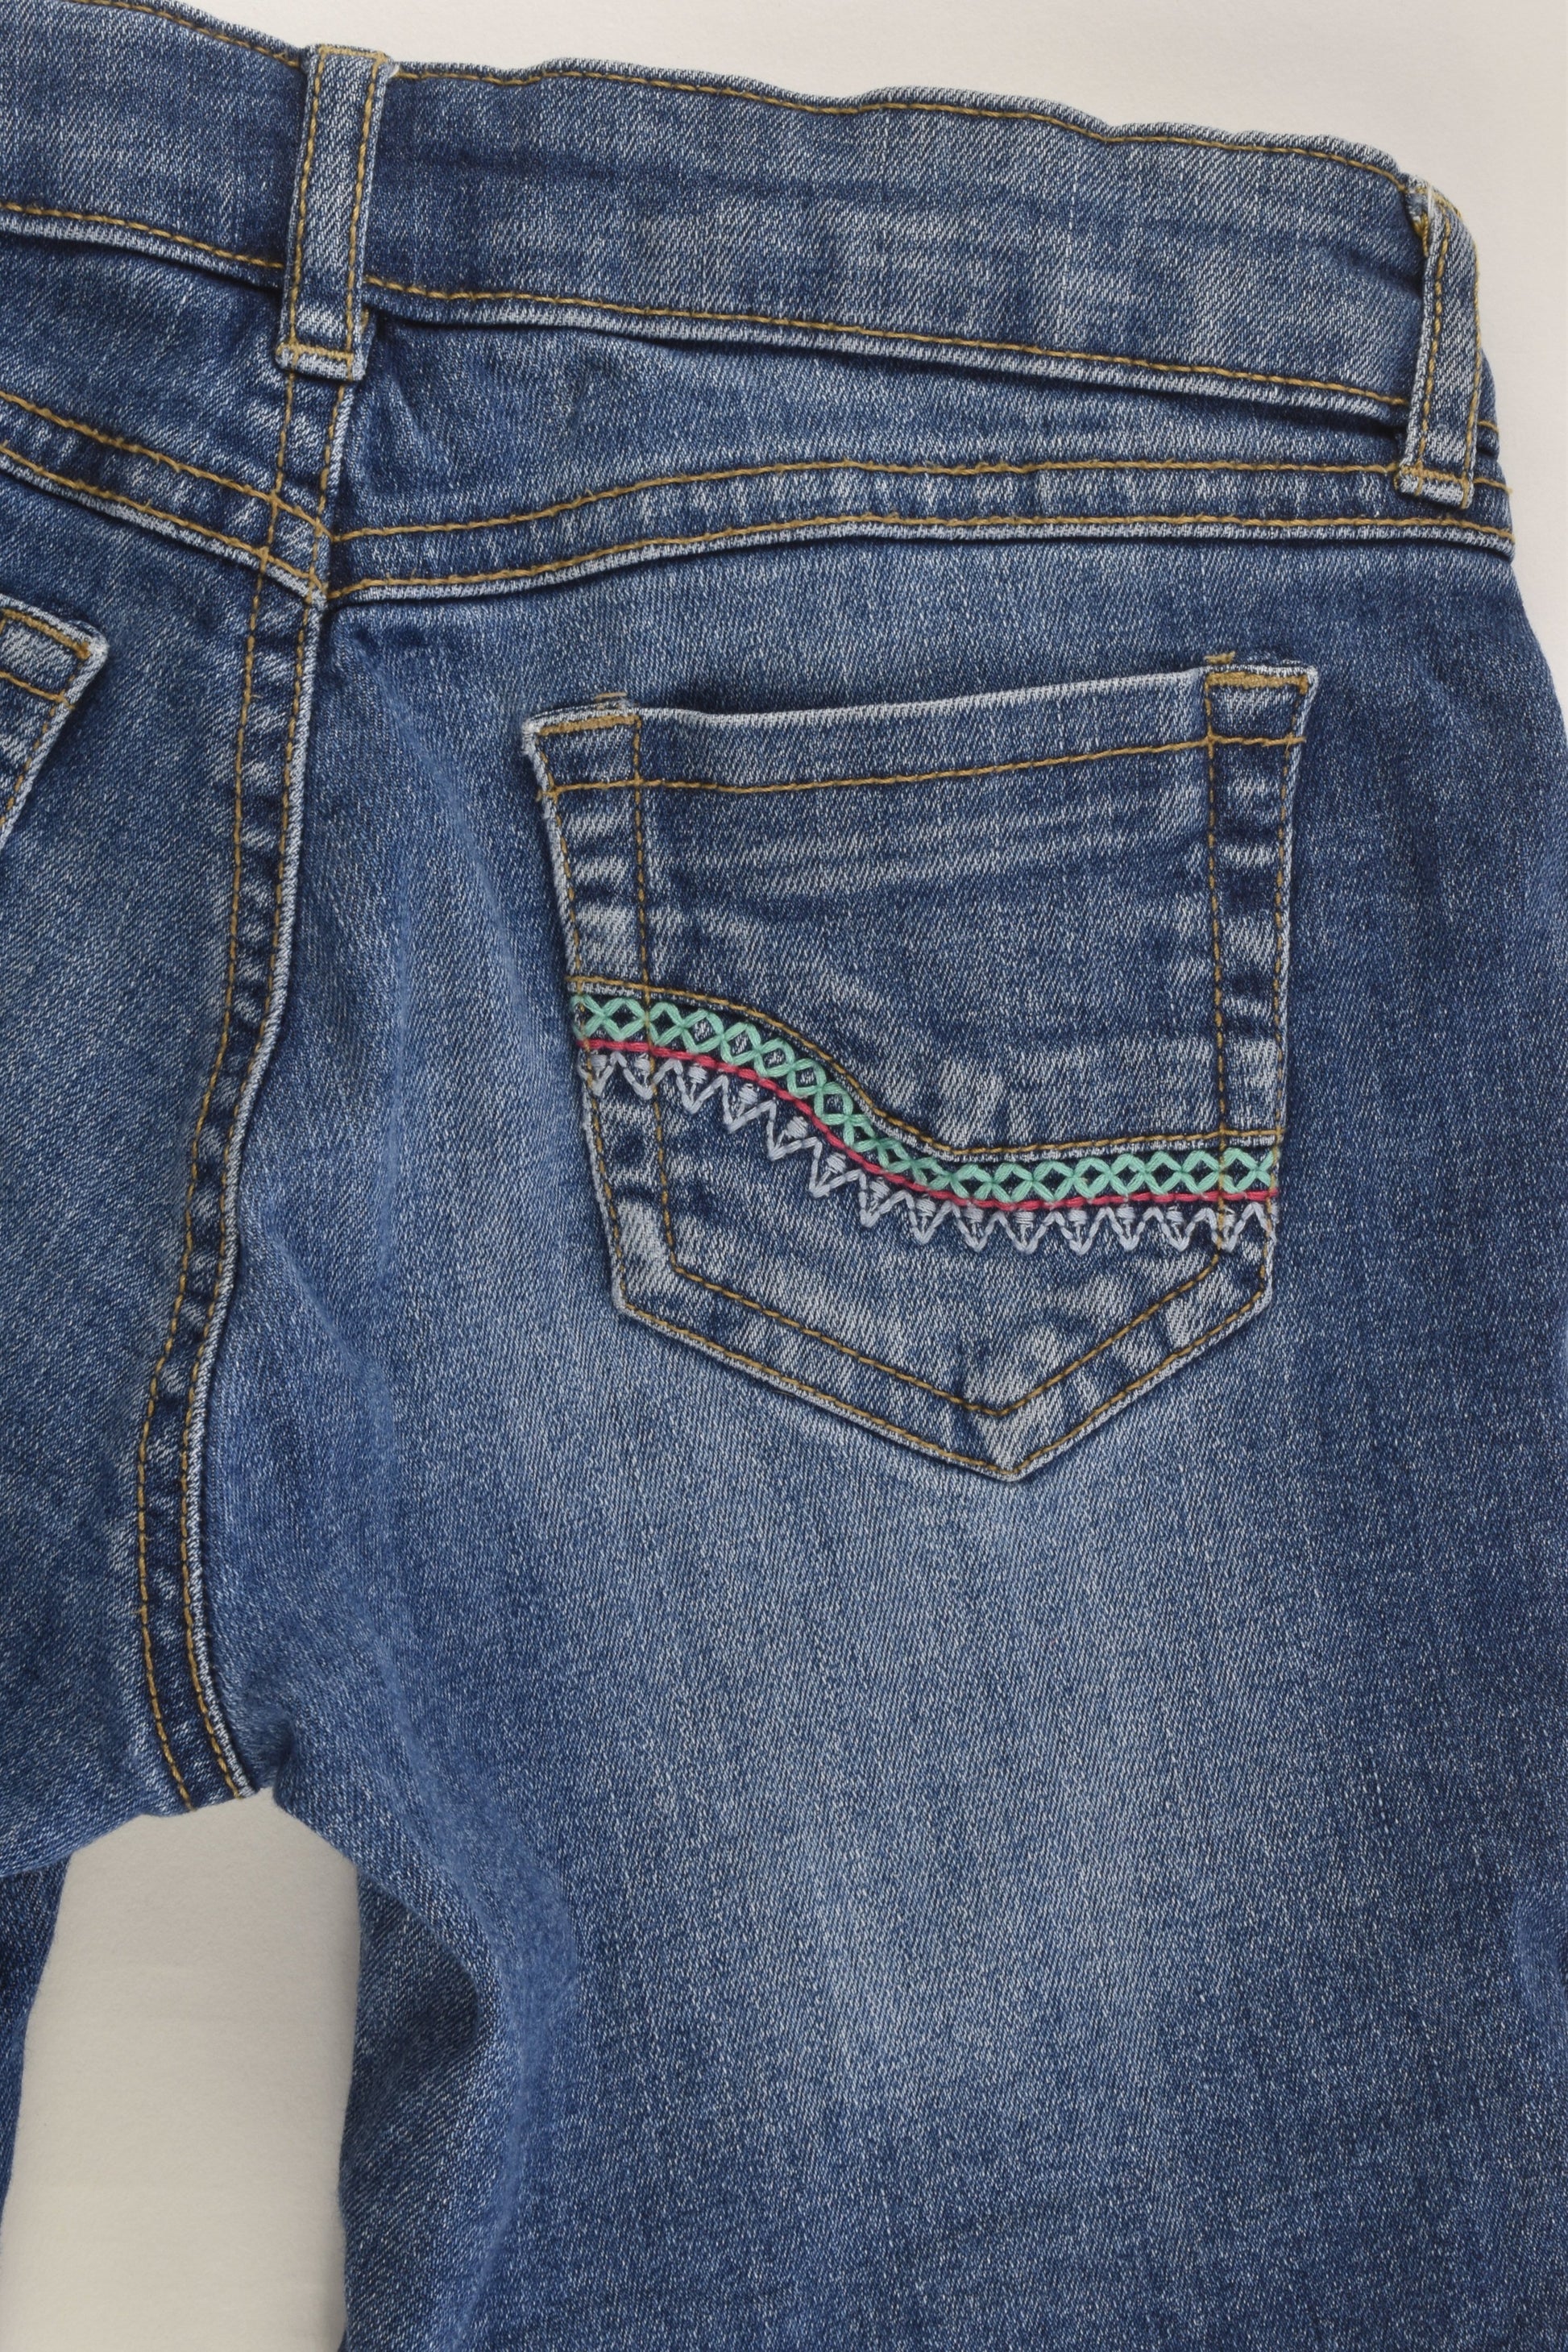 FatFace Size 6-7 Stretchy Denim Shorts with Embroidery